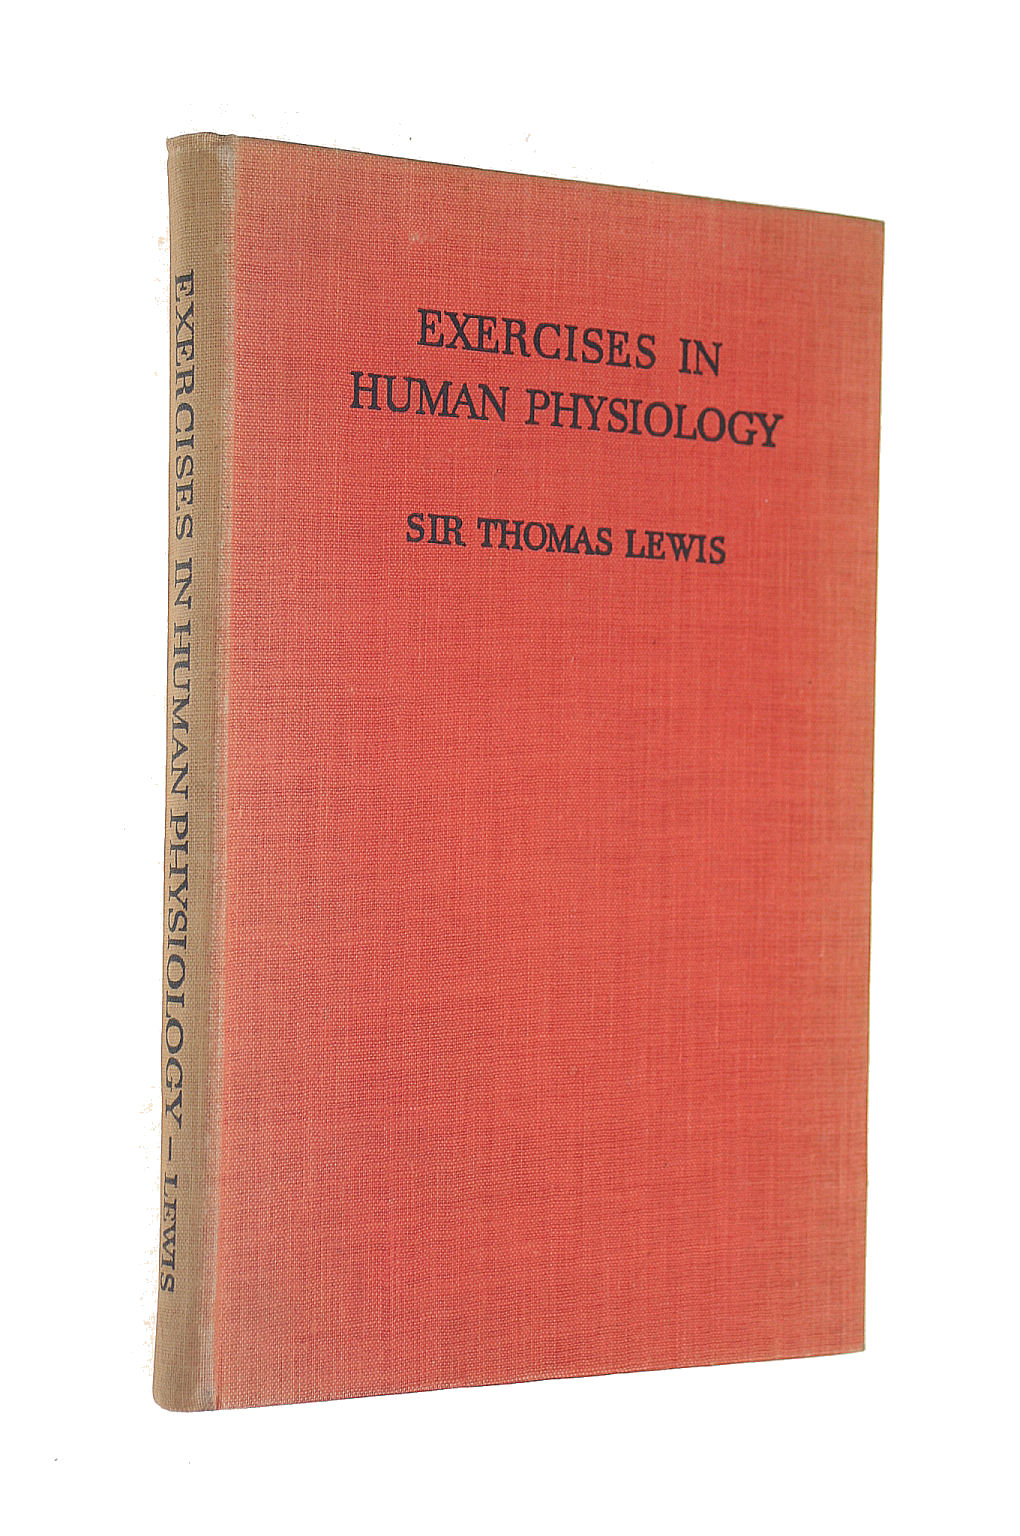 LEWIS, SIR THOMAS. - Exercises In Human Physiology (Preparatory To Clinical Work).